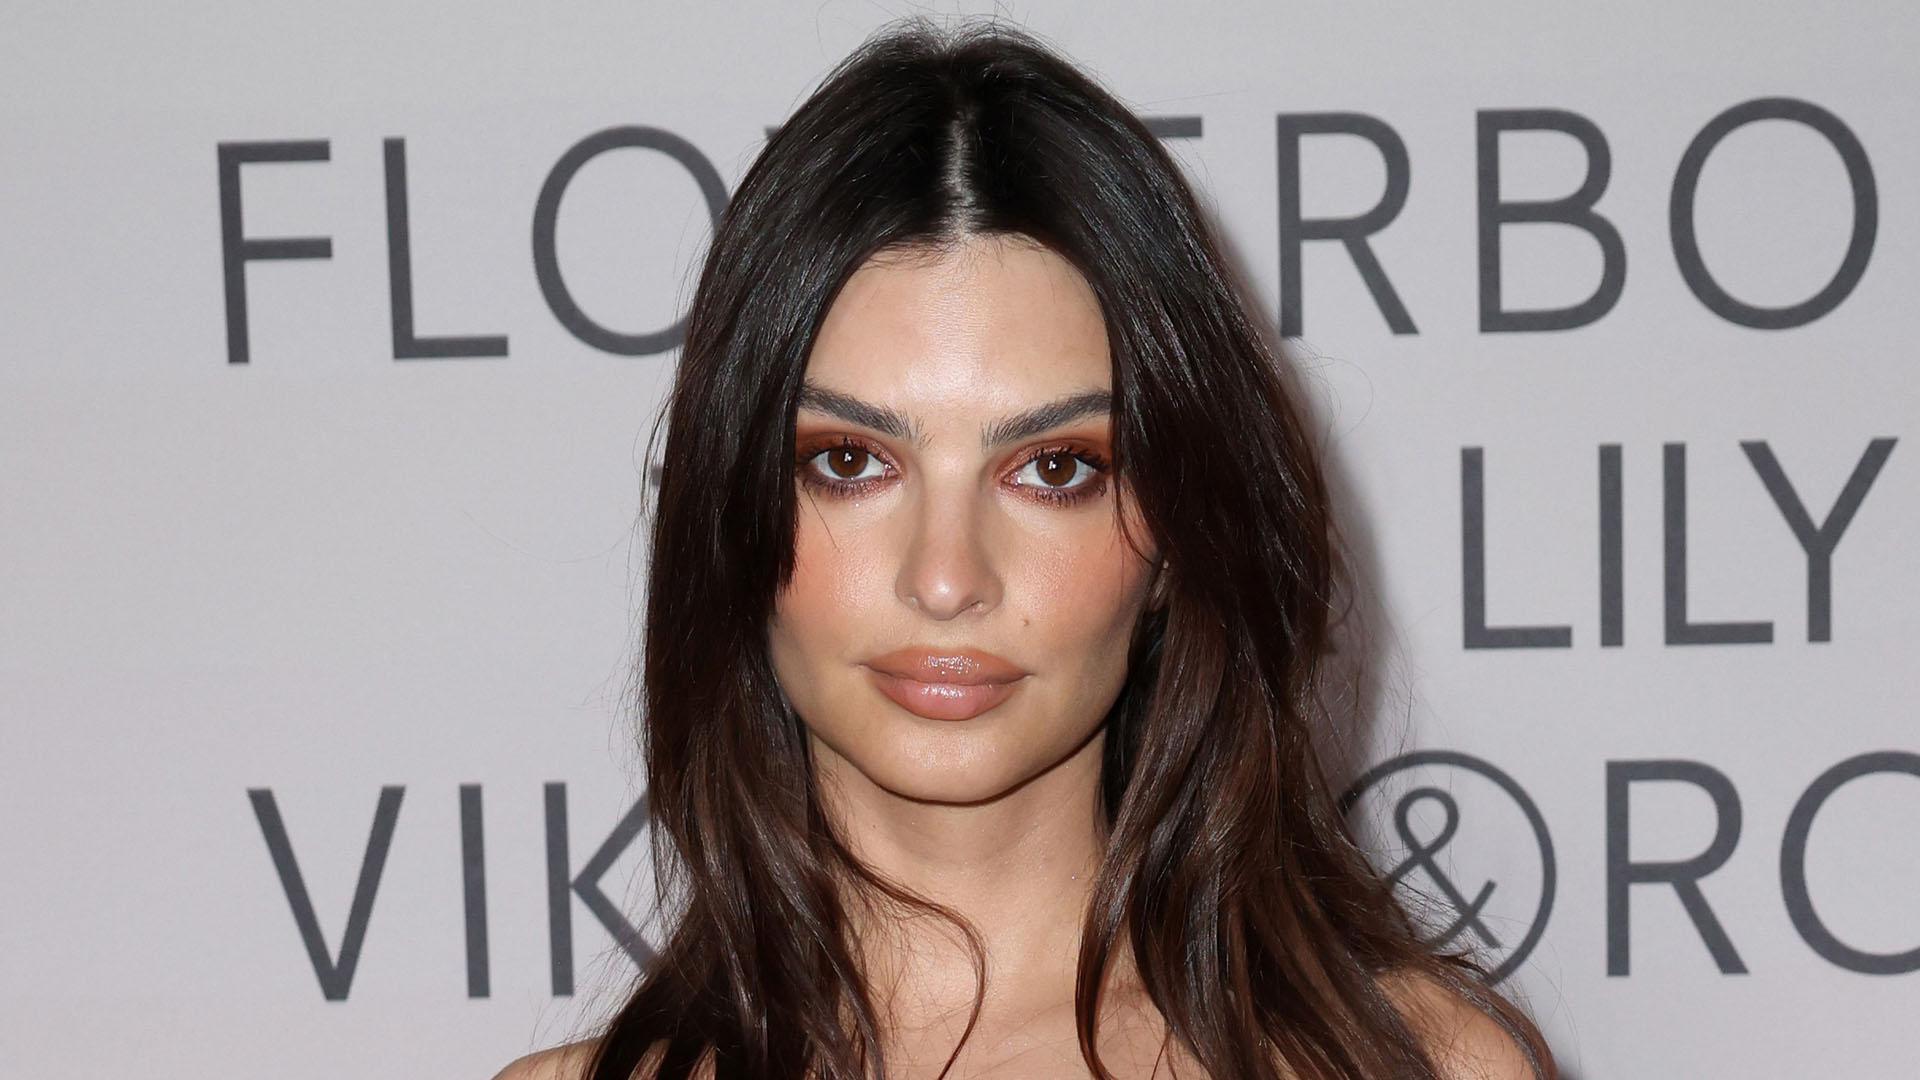 Emily Ratajkowski slams trolls calling her a ‘bimbo’ for ‘showing cleavage’ as she rocks plunging top at NYC home